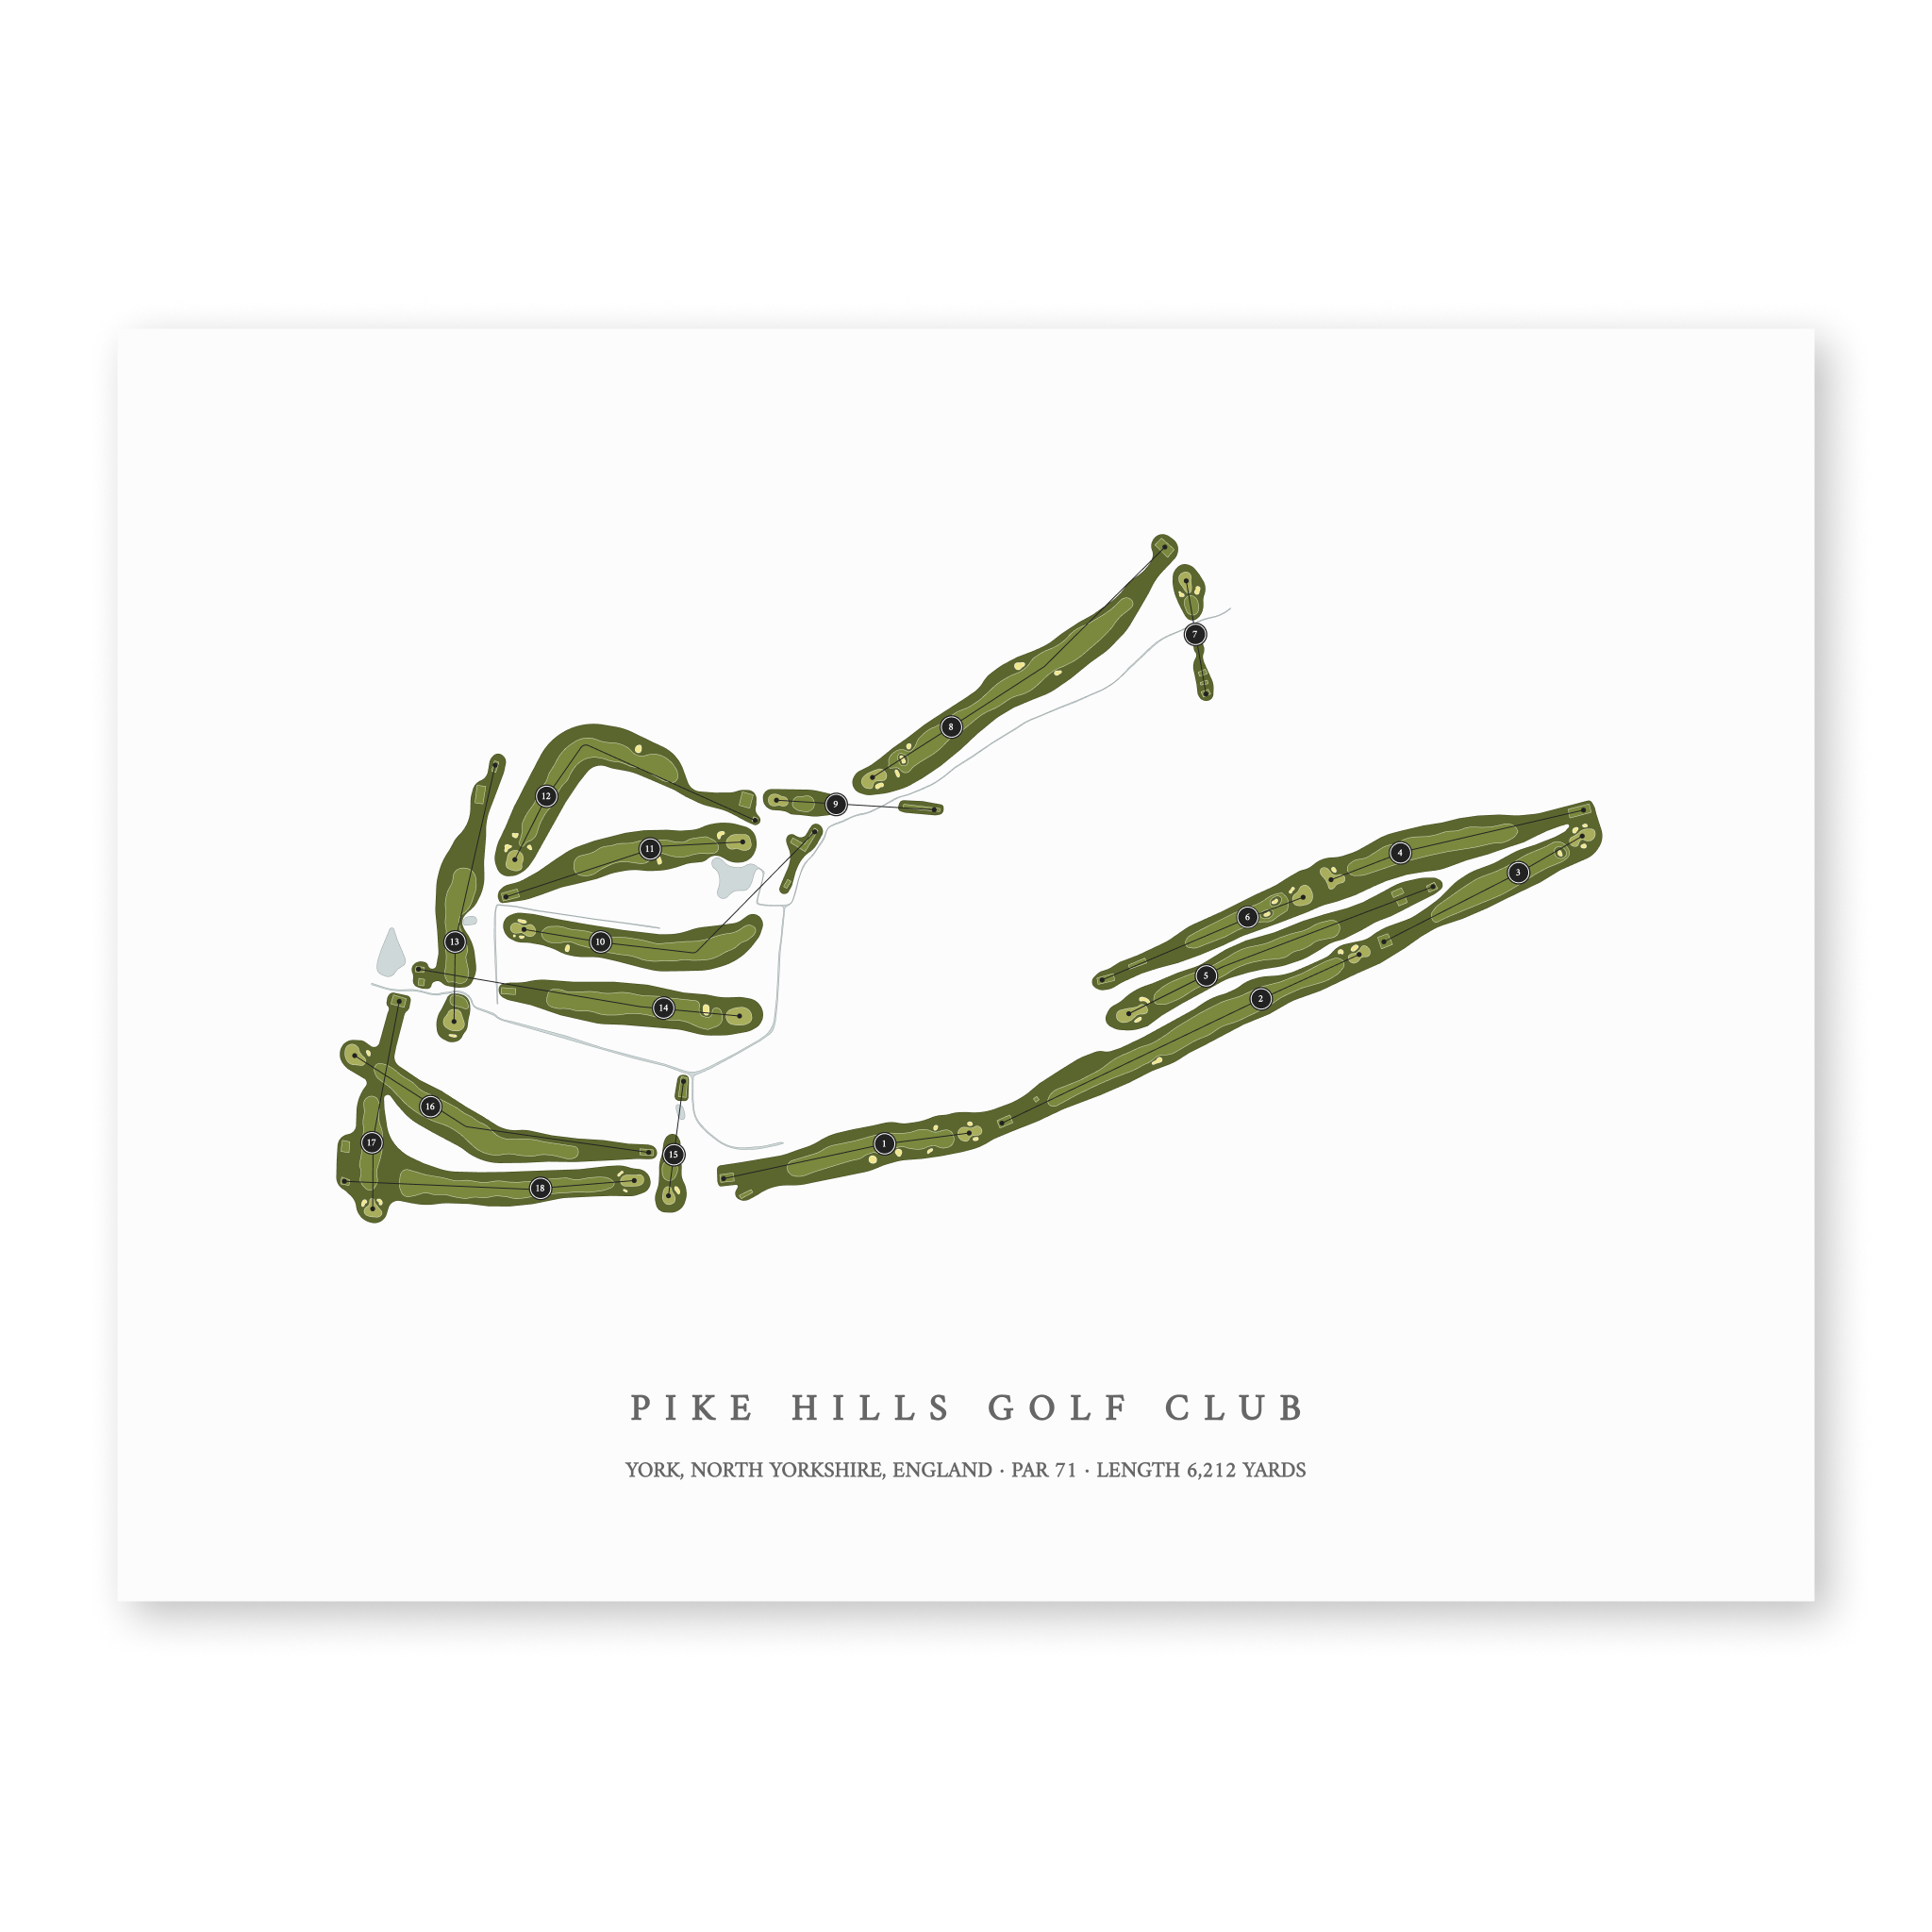 Pike Hills Golf Club | Golf Course Map | Unframed With Hole Numbers #hole numbers_yes